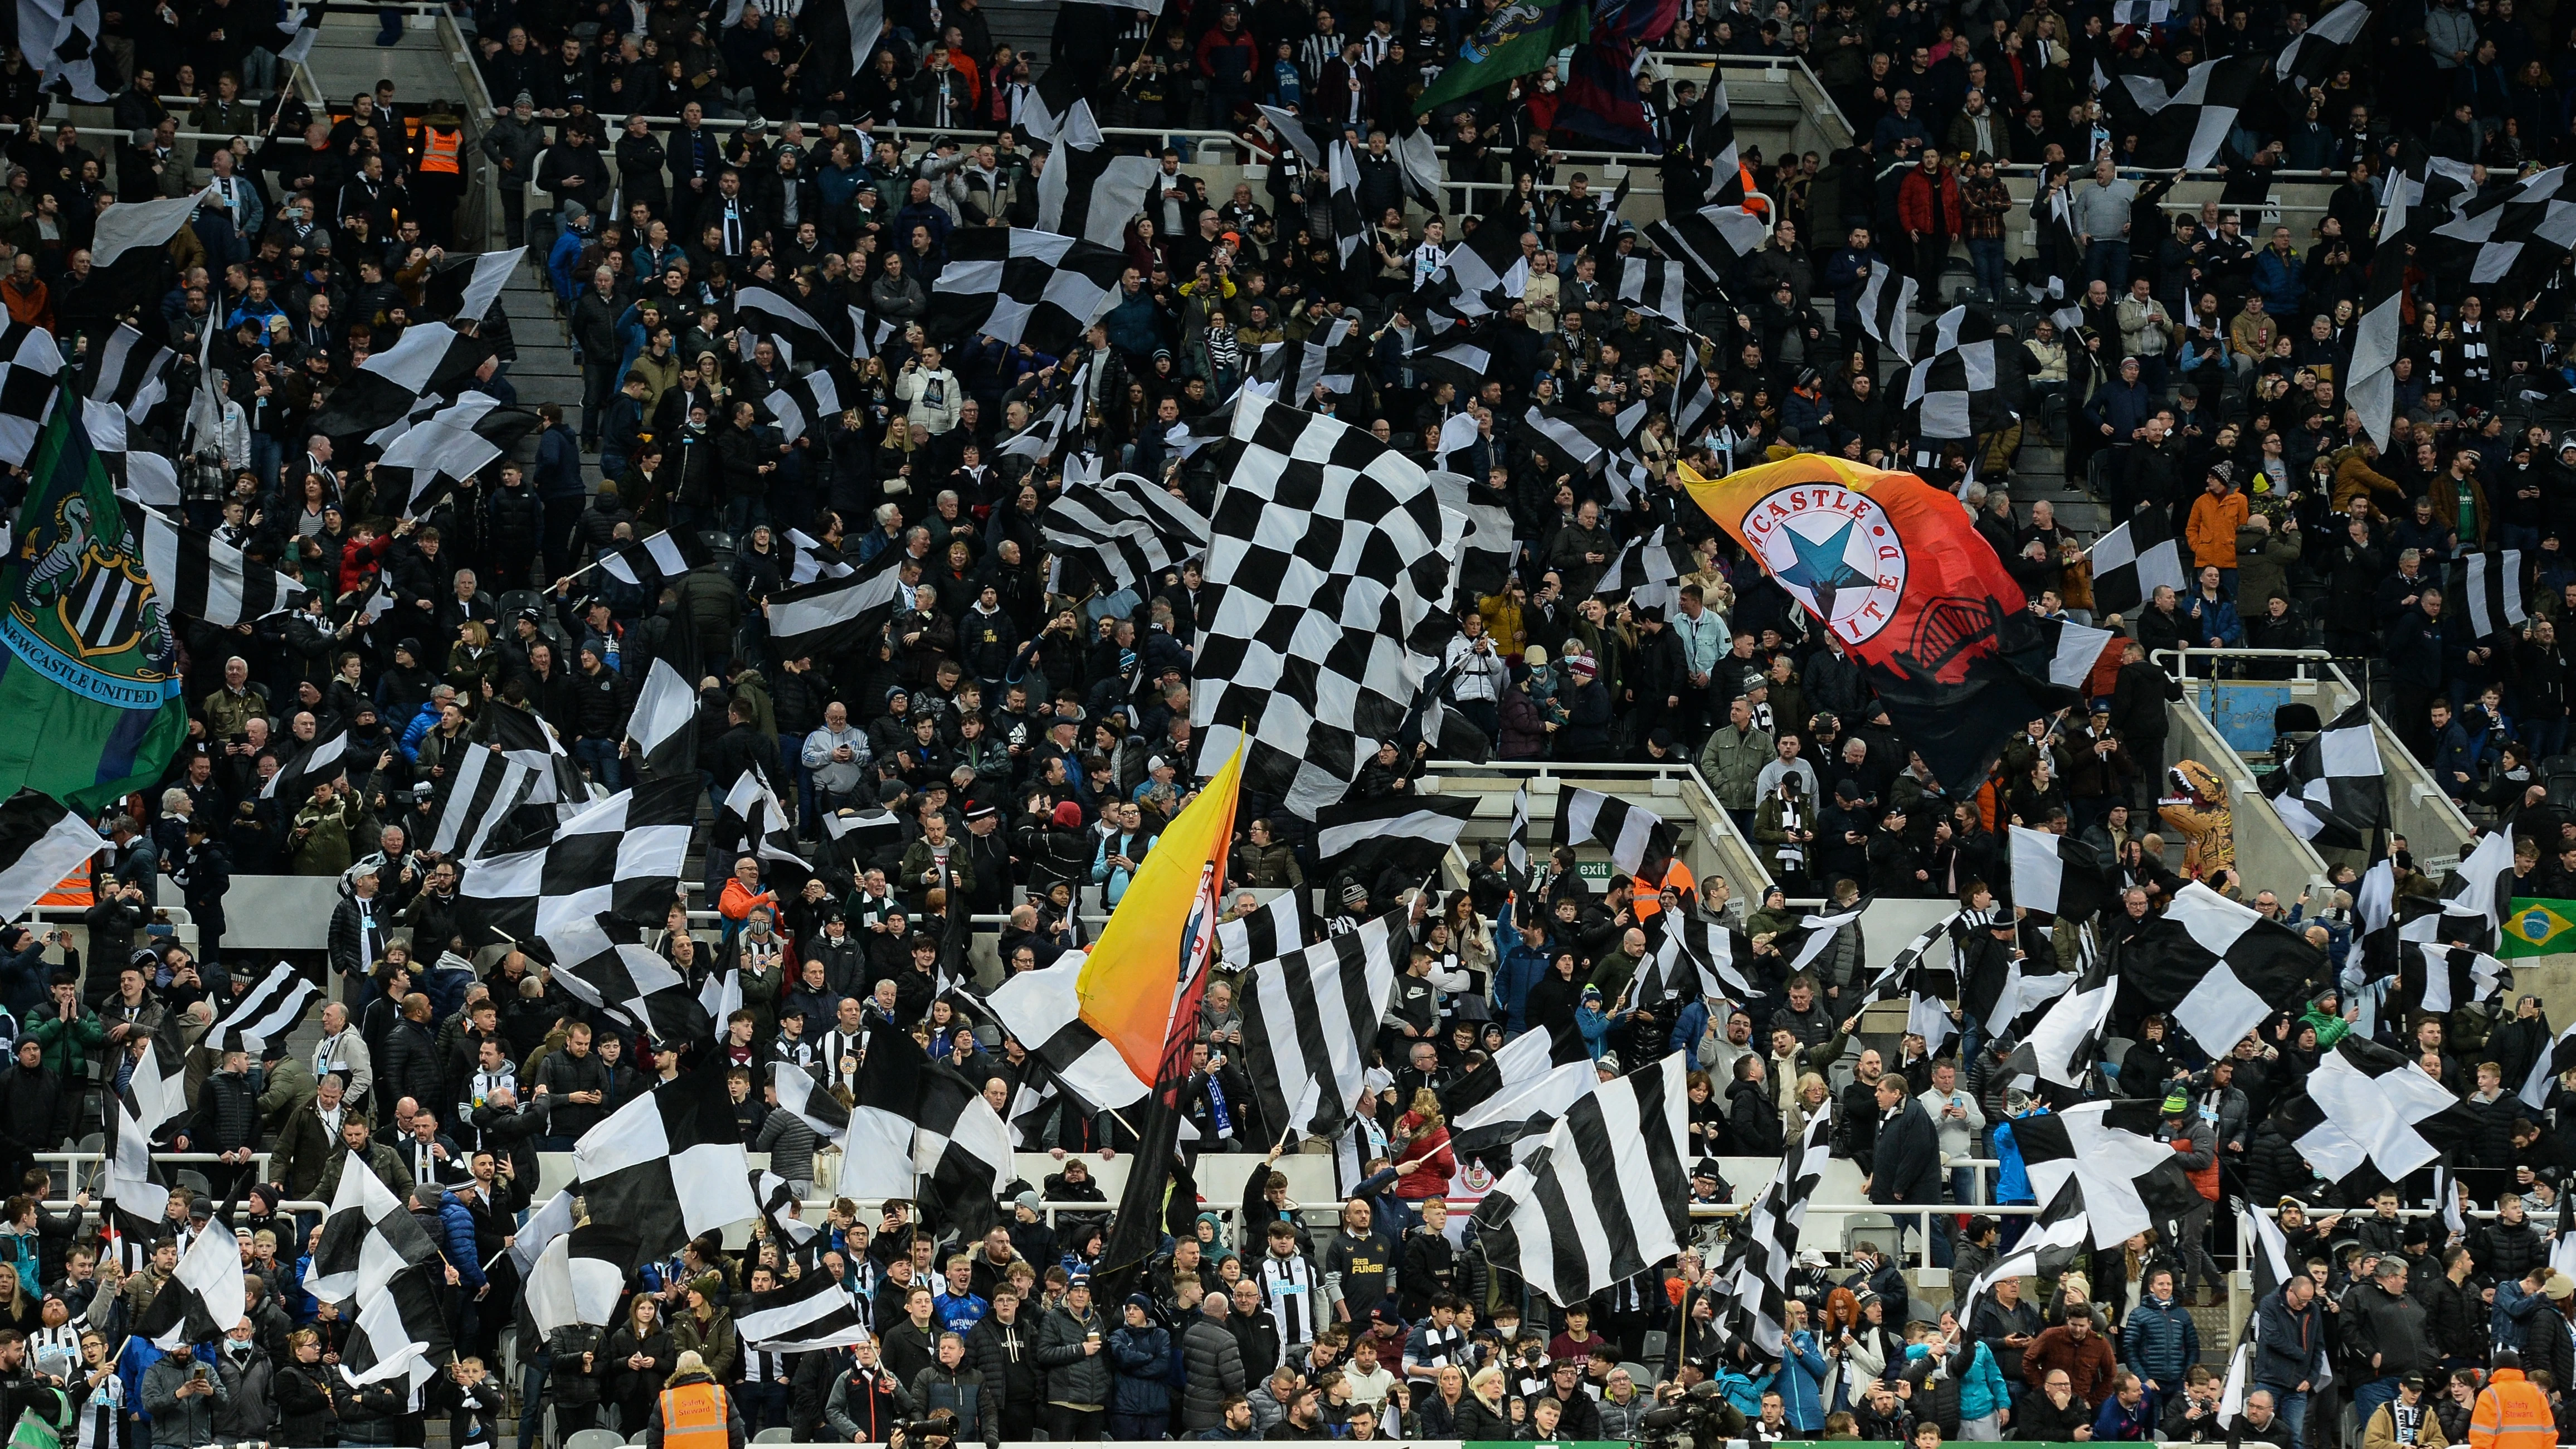 20220427-wor-flags-gallowgate-end